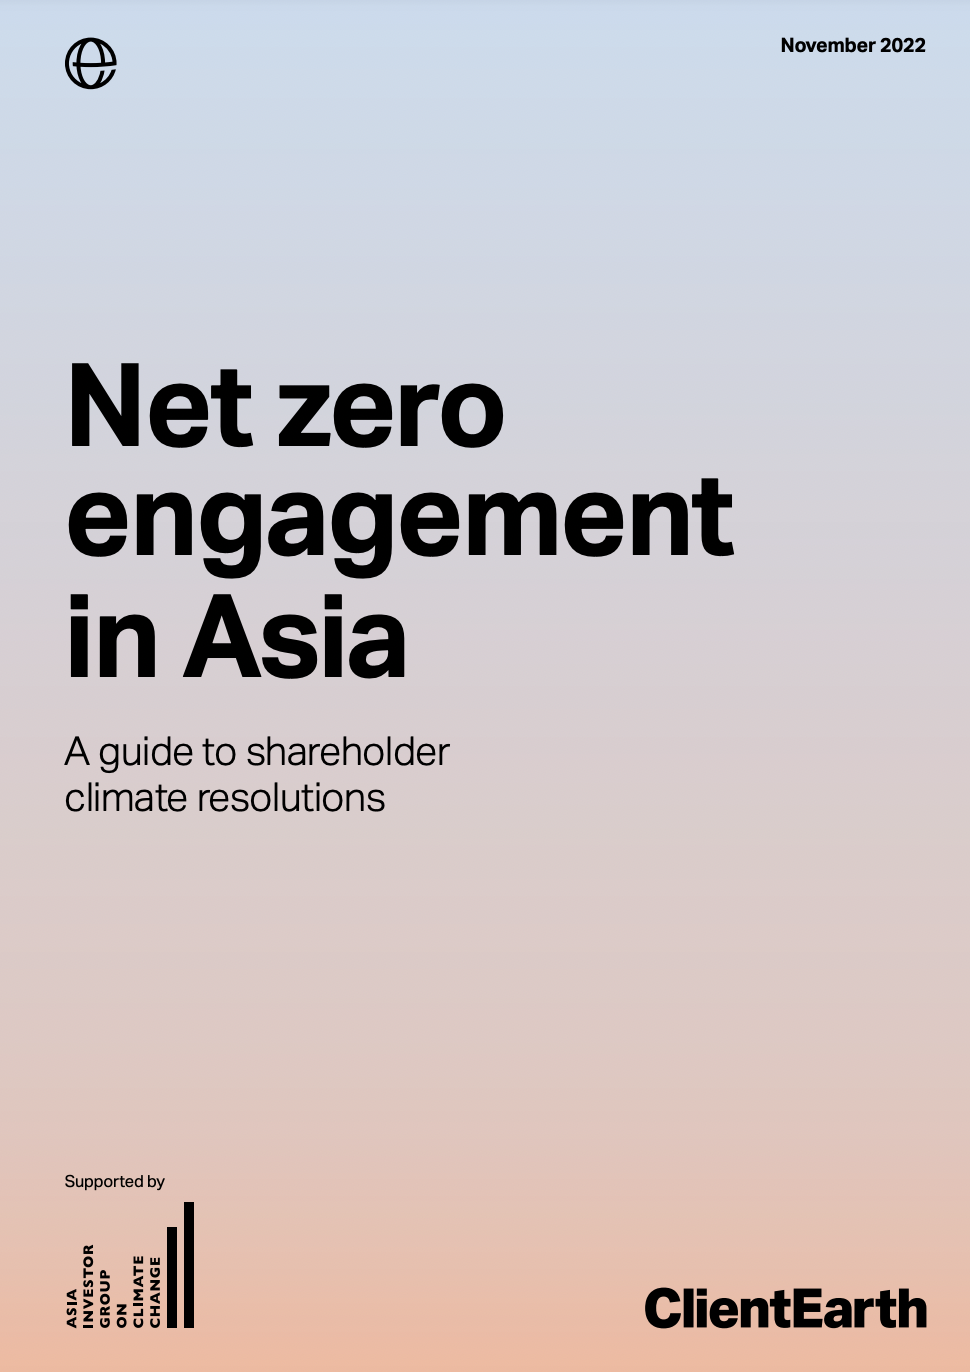 Net zero engagement in Asia November 2022 -A guide to shareholder climate resolutions (Jurisdiction-specific chapters 3.3 Japan)